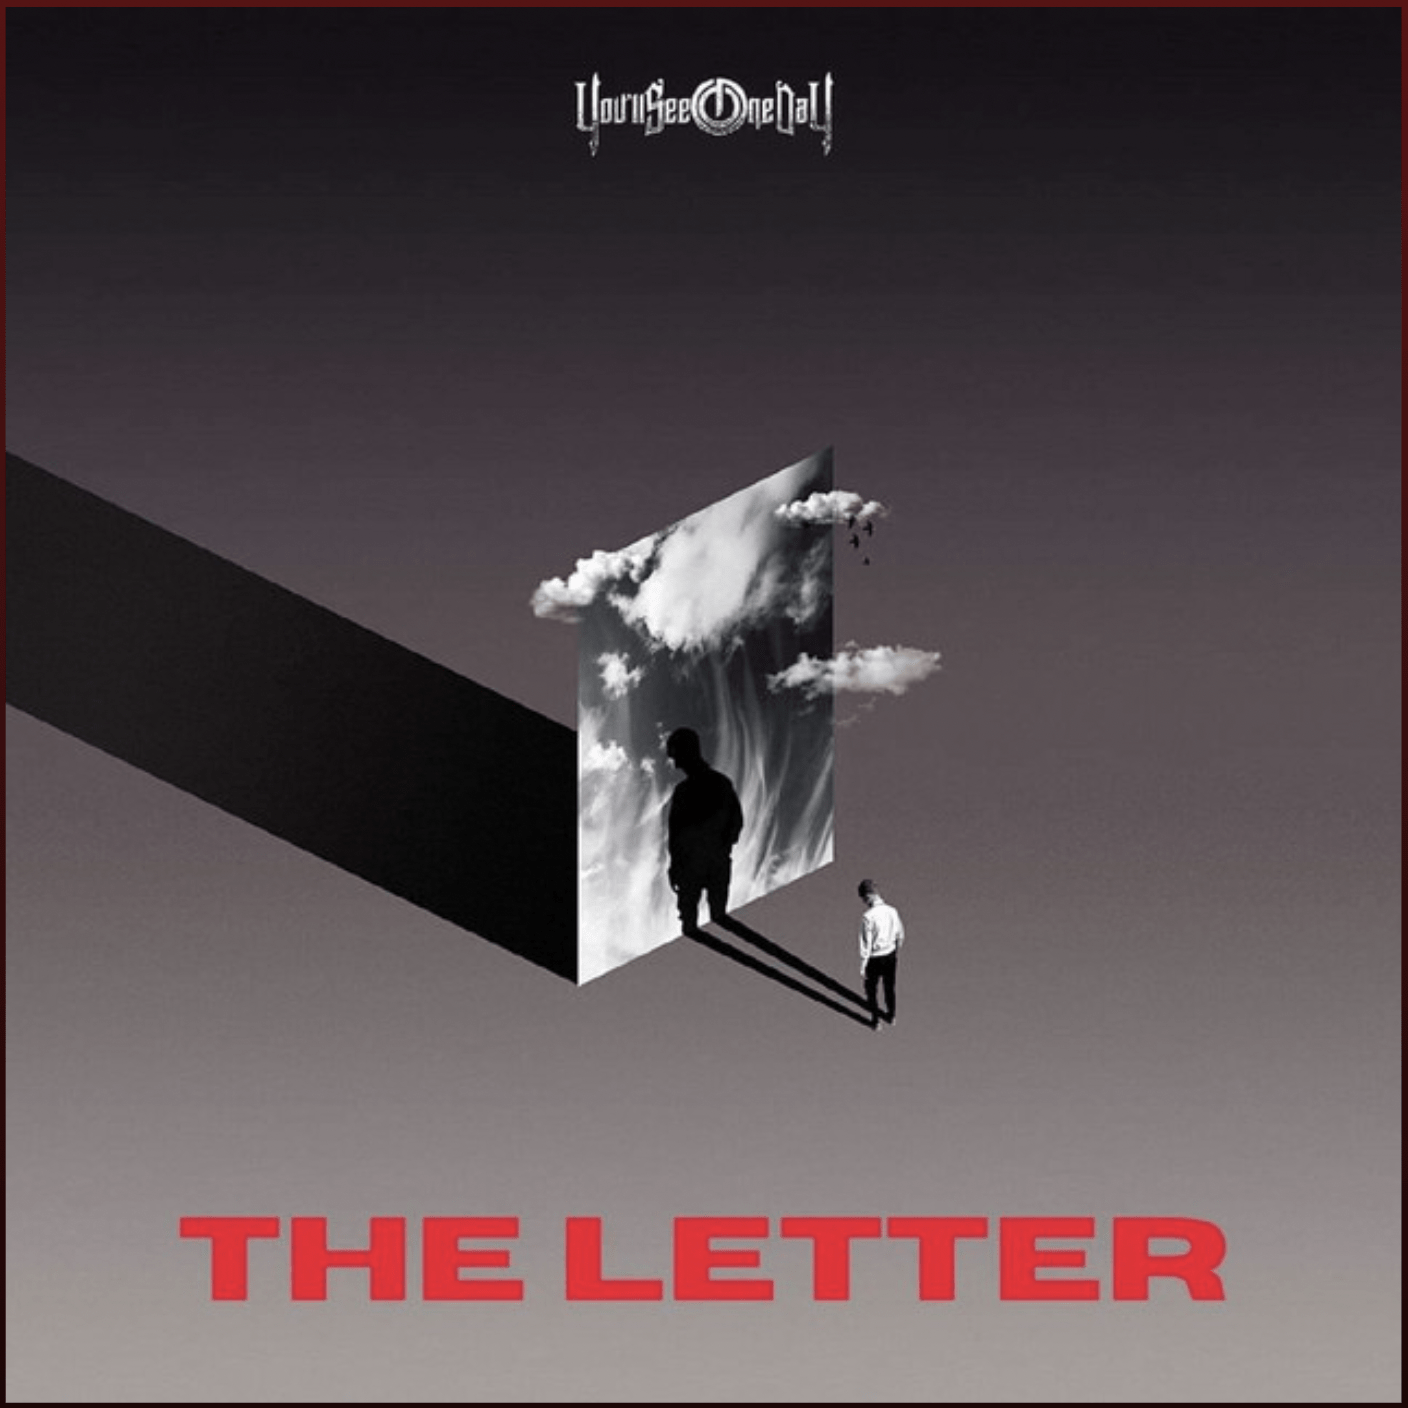 The Letter (Original Single) by You'll See One Day